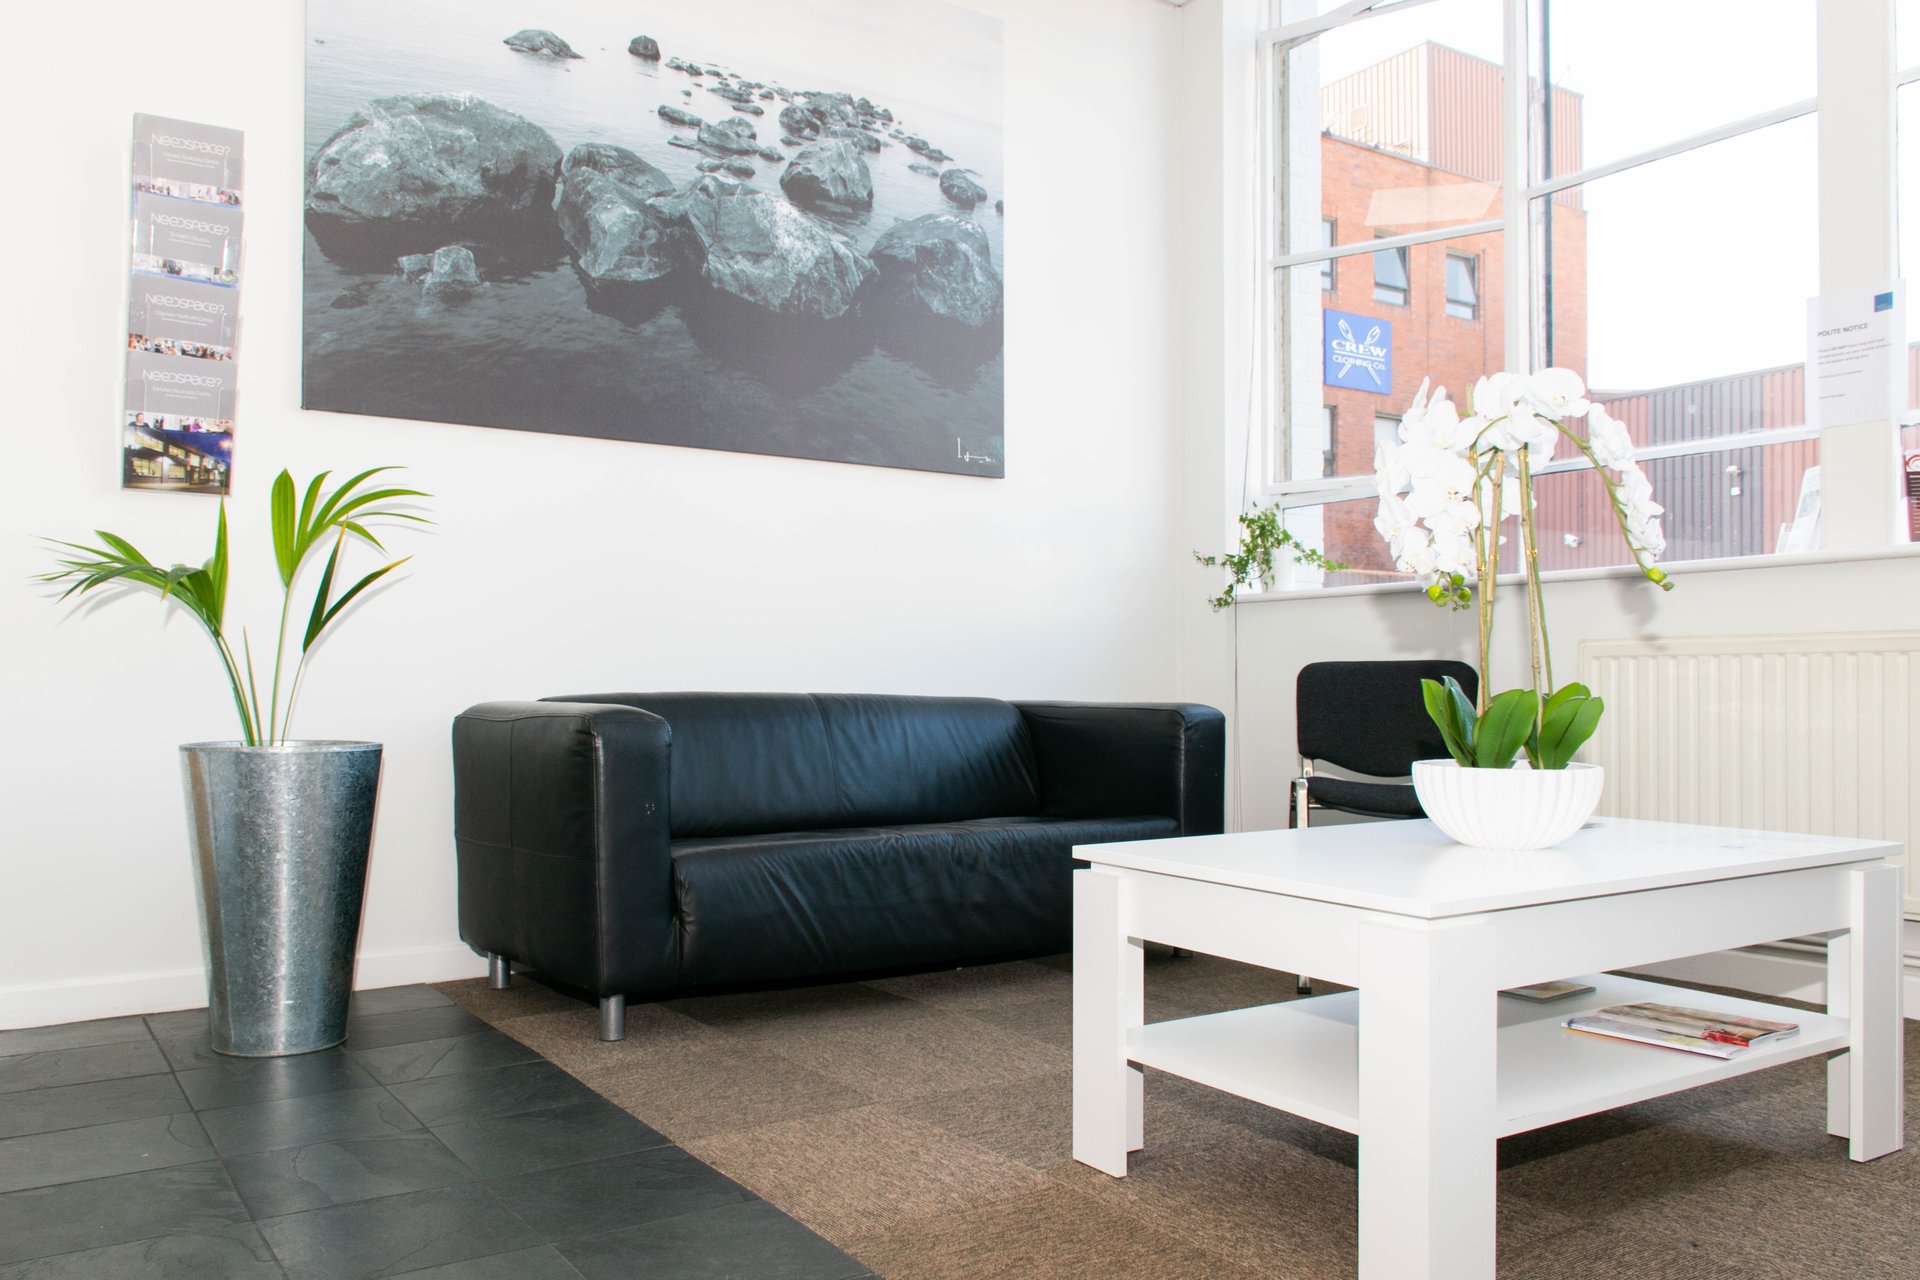 Needspace? - Earlsfield Business Centre beltere